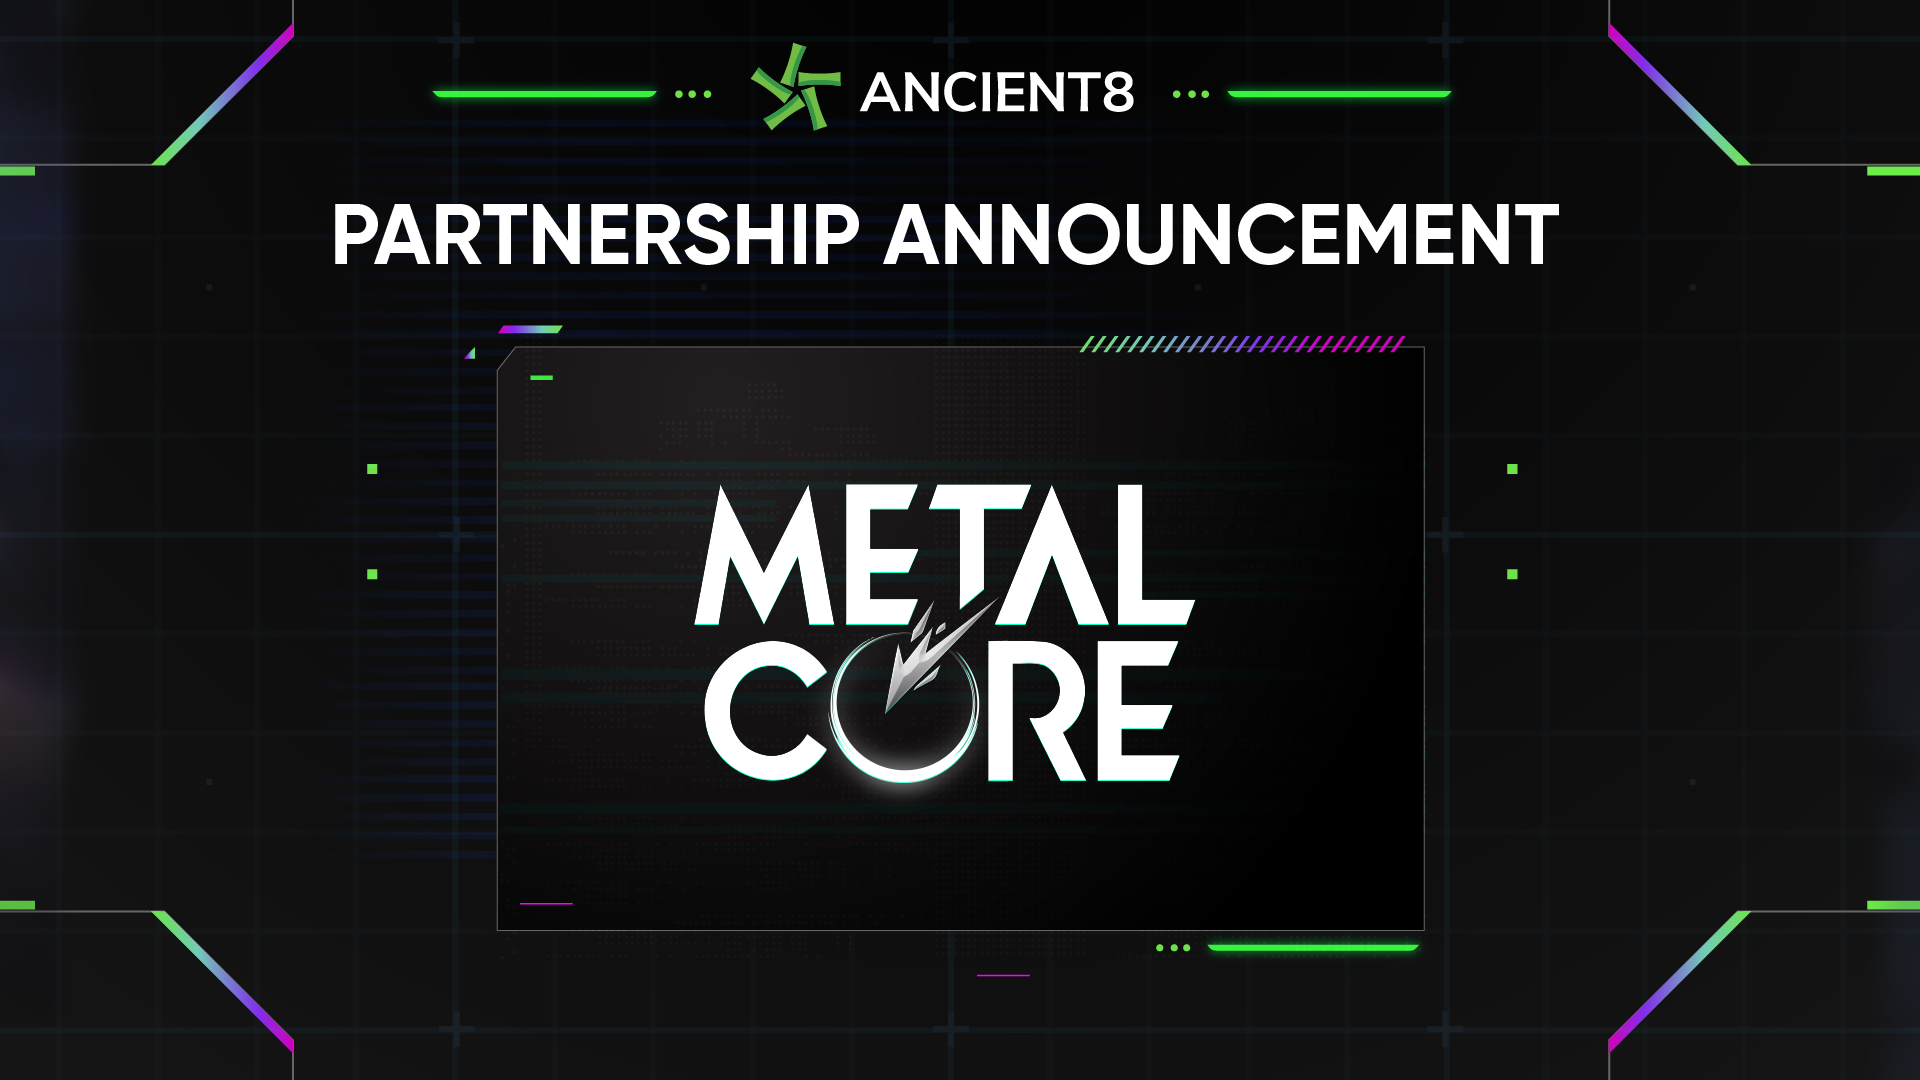 Ancient8 partners with MetalCore, a blockchain-based mechanized combat game